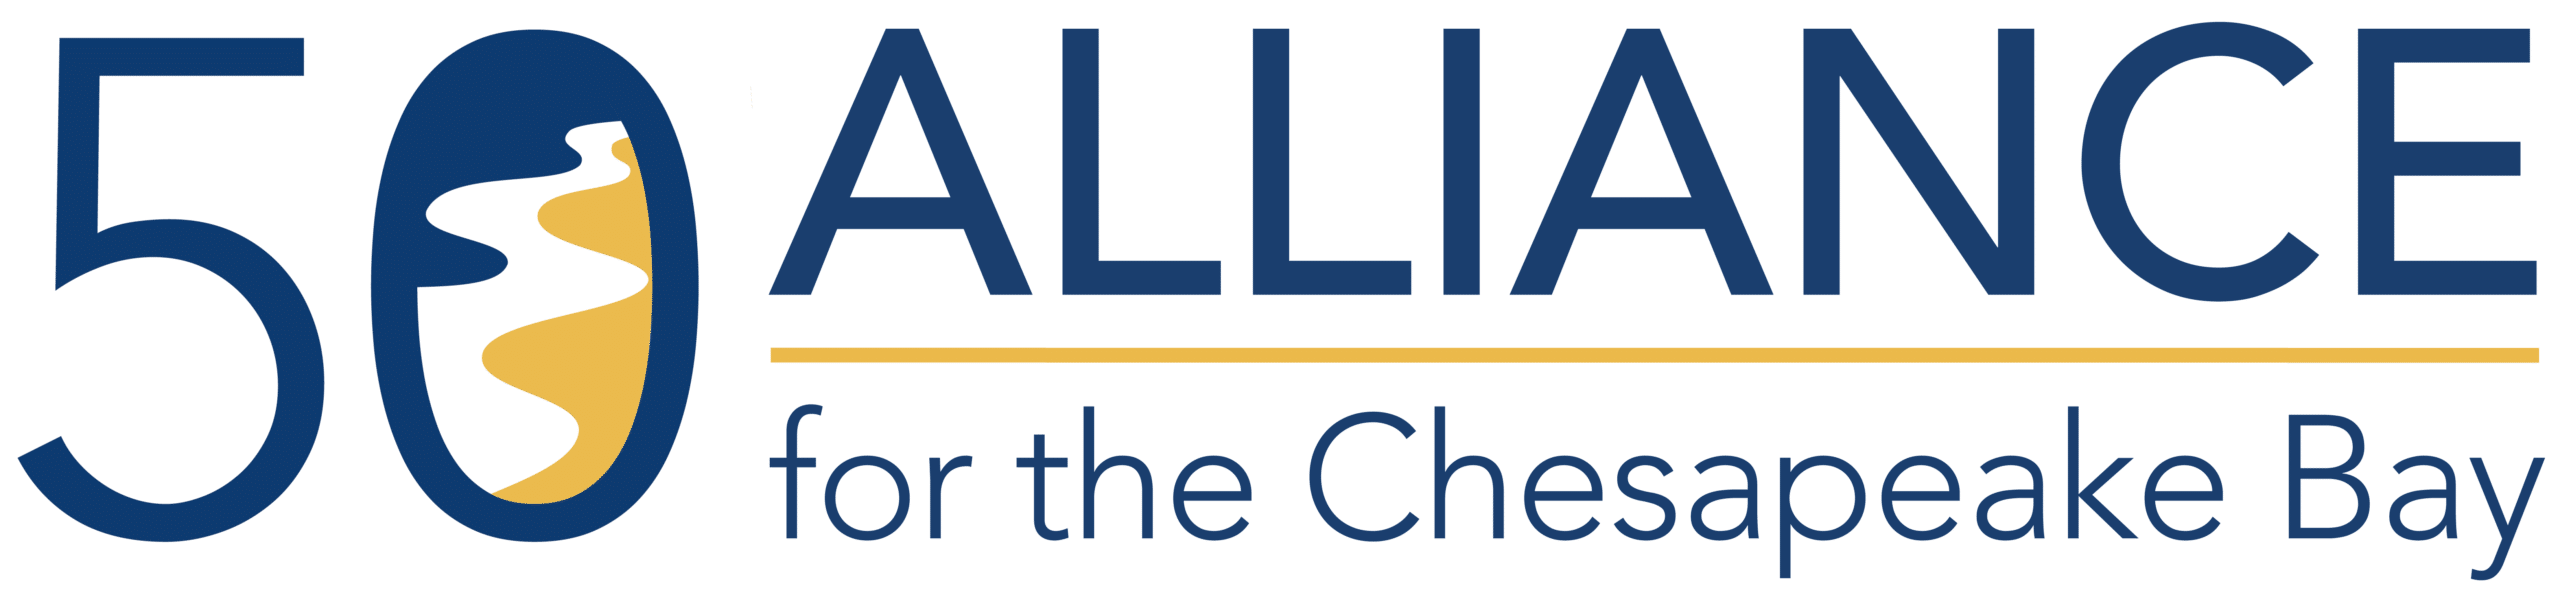 alliance for the chesapeake bay